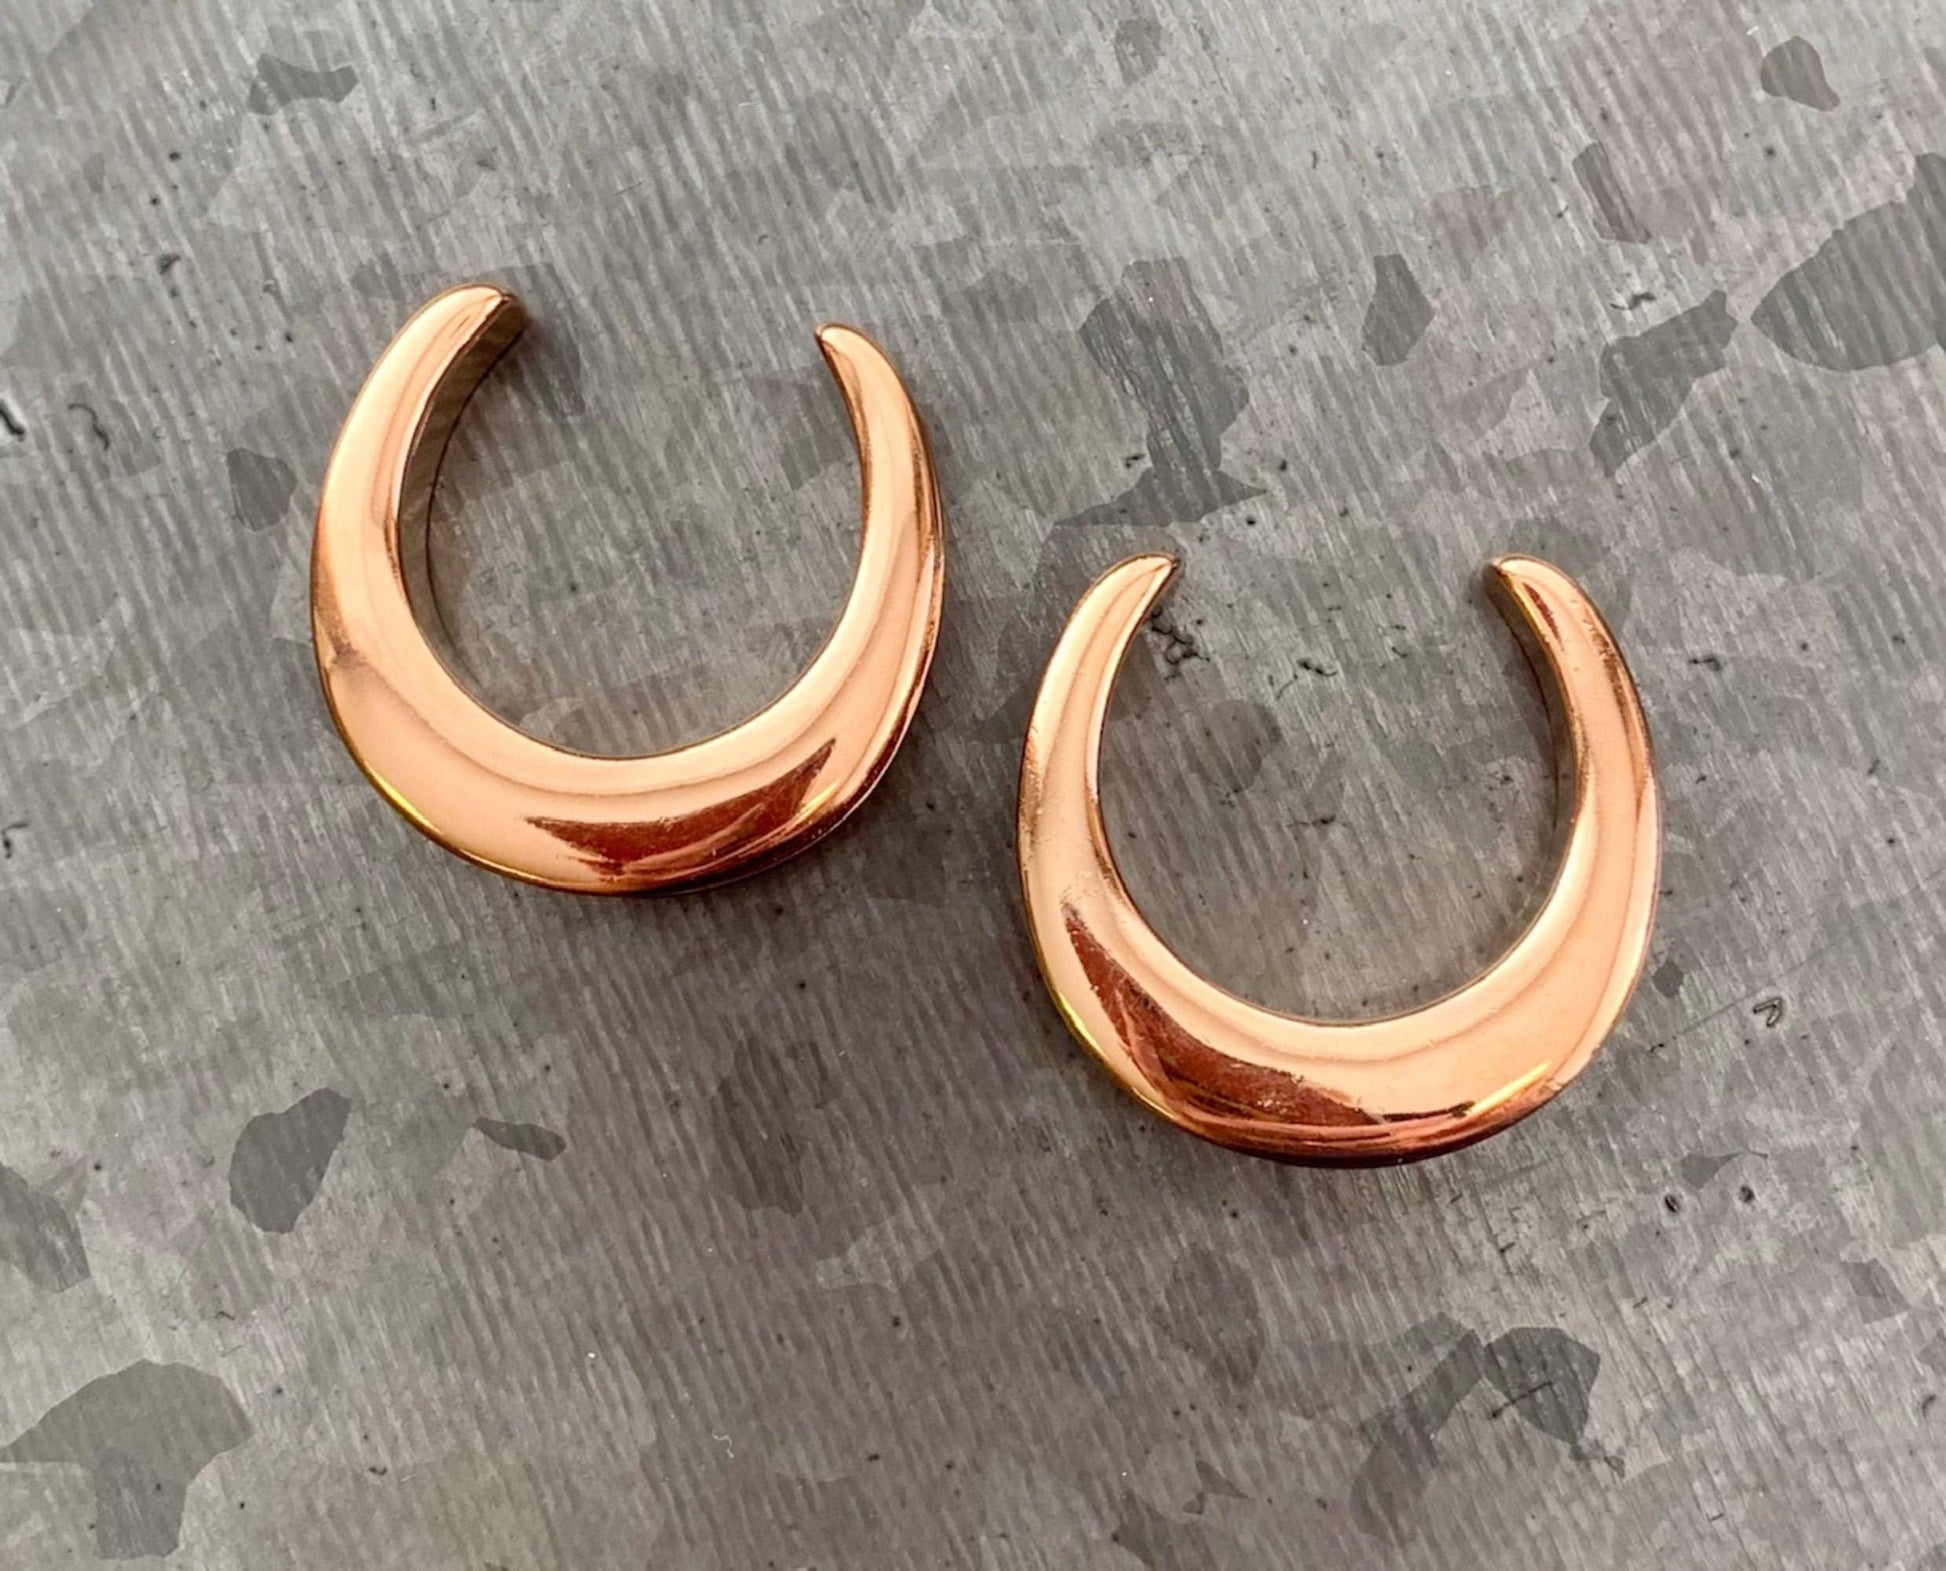 Pair of Beautiful Rose Gold Saddle Surgical Steel Ear Spreaders Hanger-Tunnels/Plugs - Gauges 00g (10mm) thru 1" (25mm) available!